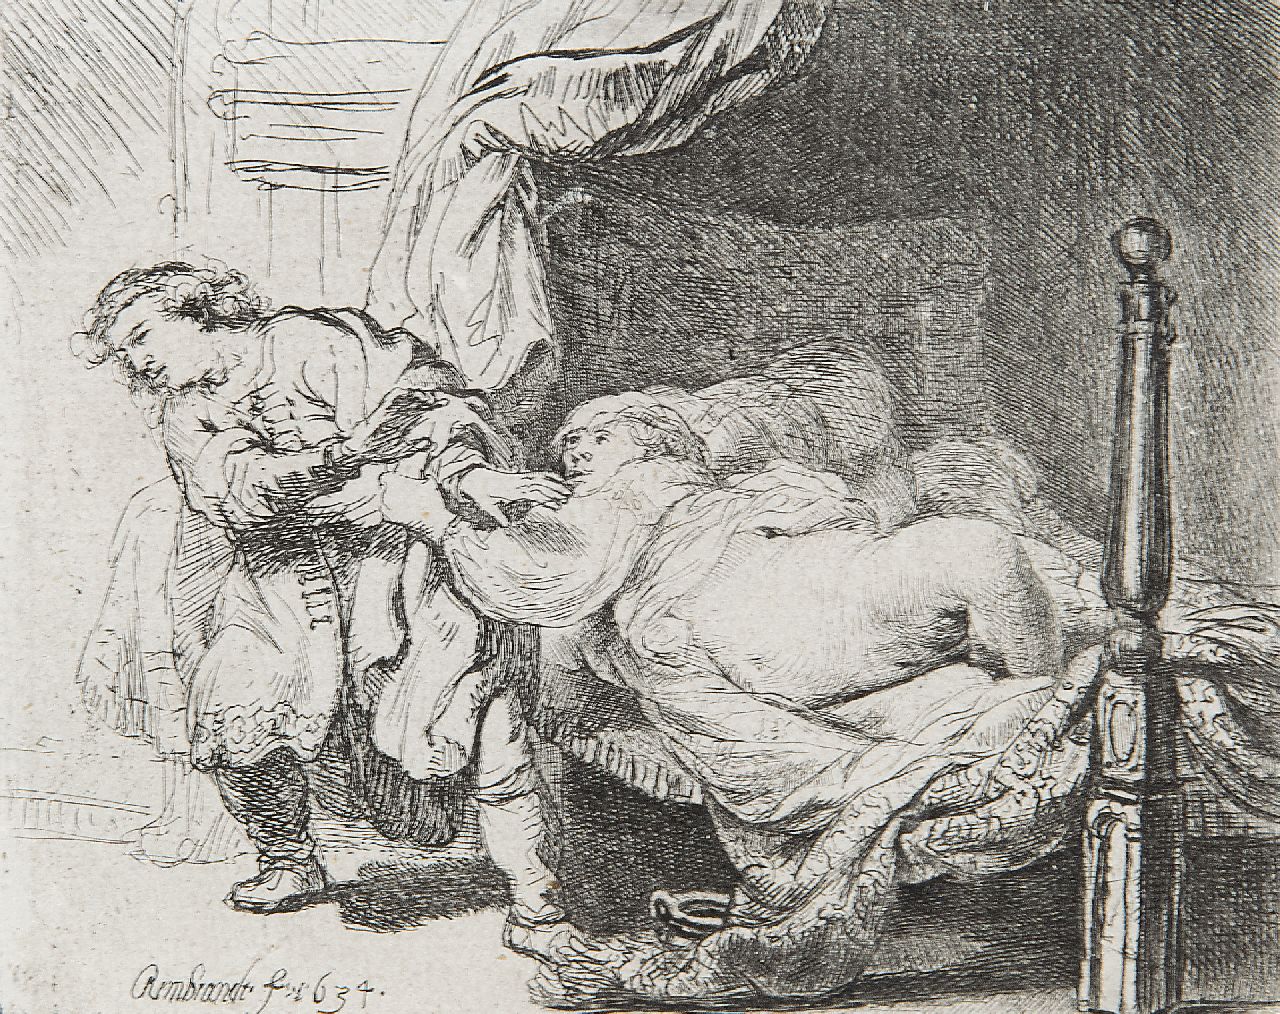 Rembrandt (Rembrandt Harmensz. van Rijn)   | Rembrandt (Rembrandt Harmensz. van Rijn) | Prints and Multiples offered for sale | Josef and Potifar's wife, etching on paper 9.0 x 11.5 cm, signed l.l. on the plate and dated on the plate 1634